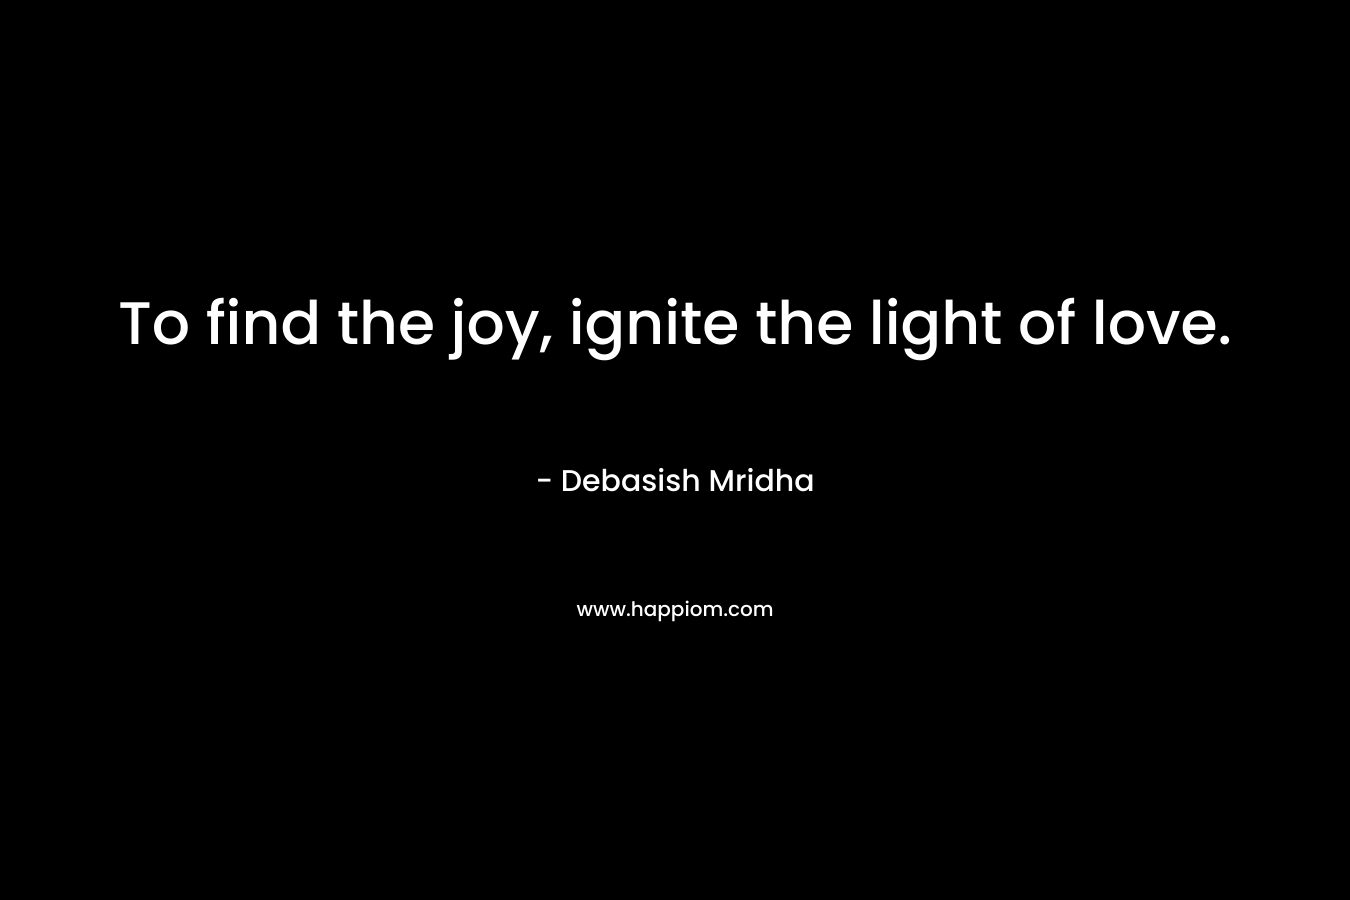 To find the joy, ignite the light of love.